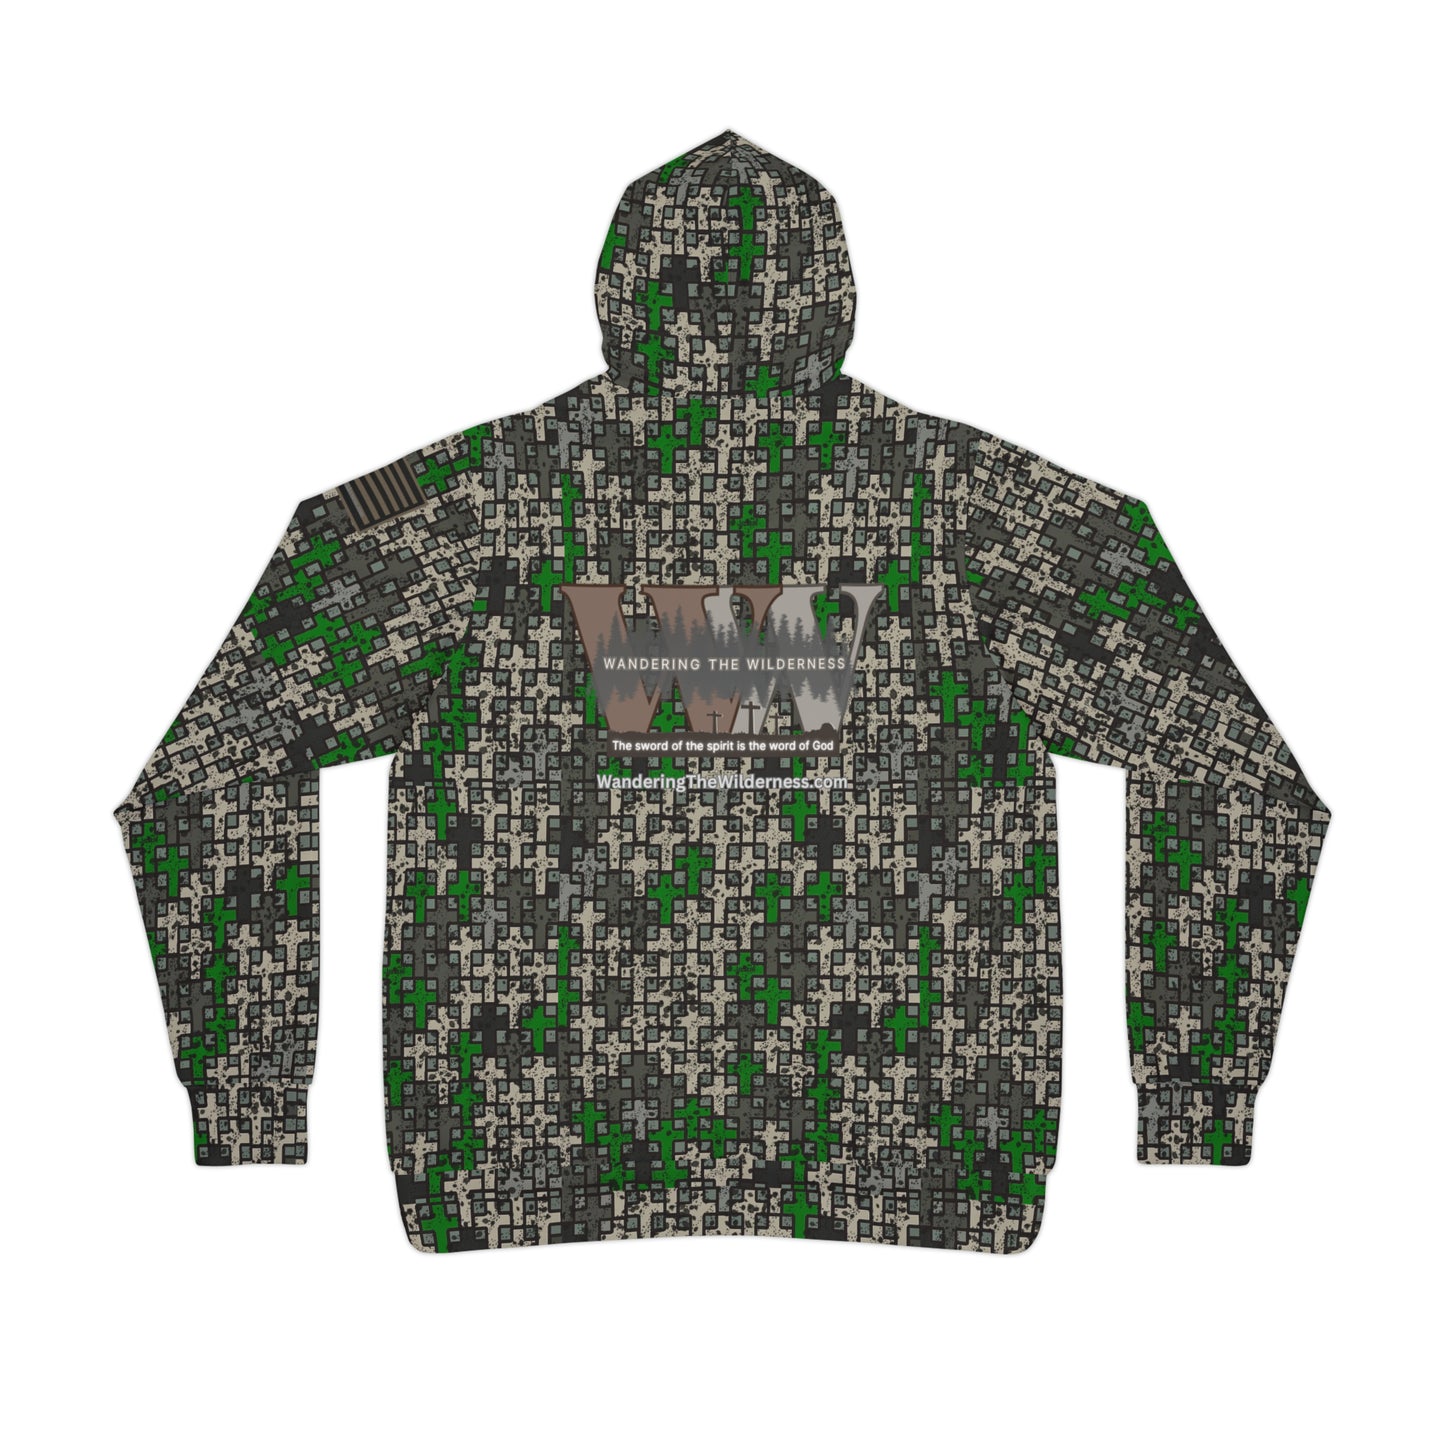 Wandering the Wilderness Hickory Flats camo unisex Athletic Hoodie. These tend to run small so we recommend buying one size larger than you normally wear, also these are made on demand and can take two weeks or longer to be delivered.